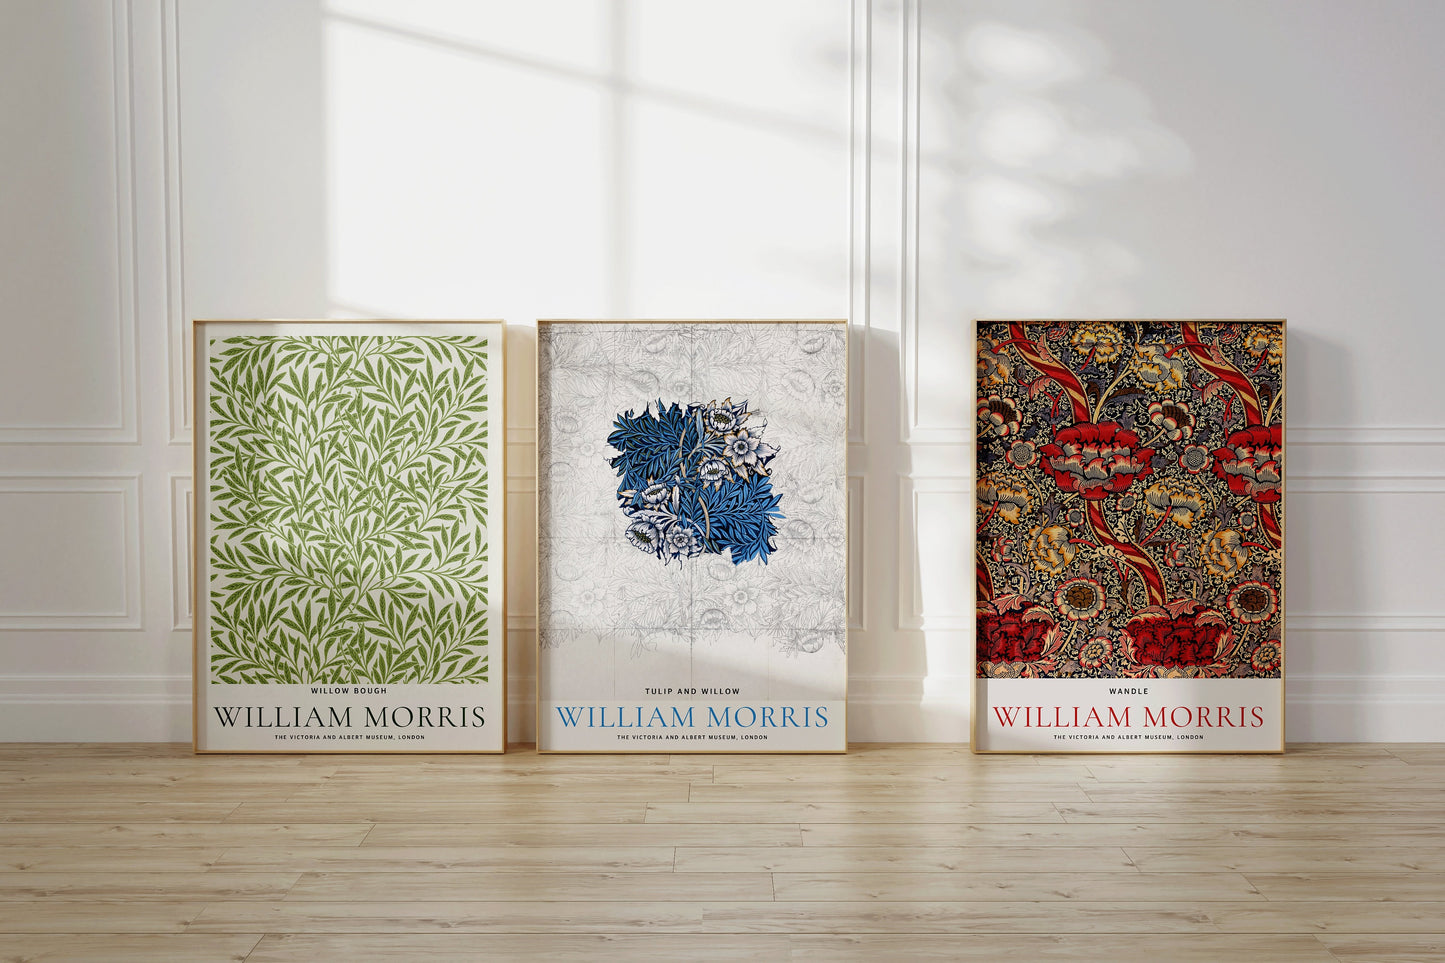 Set of 3 William Morris Prints GREEN BLUE RED Museum Exhibition Art Nouveau Flower Pattern Flower Ready to hang Framed Home Office Decor